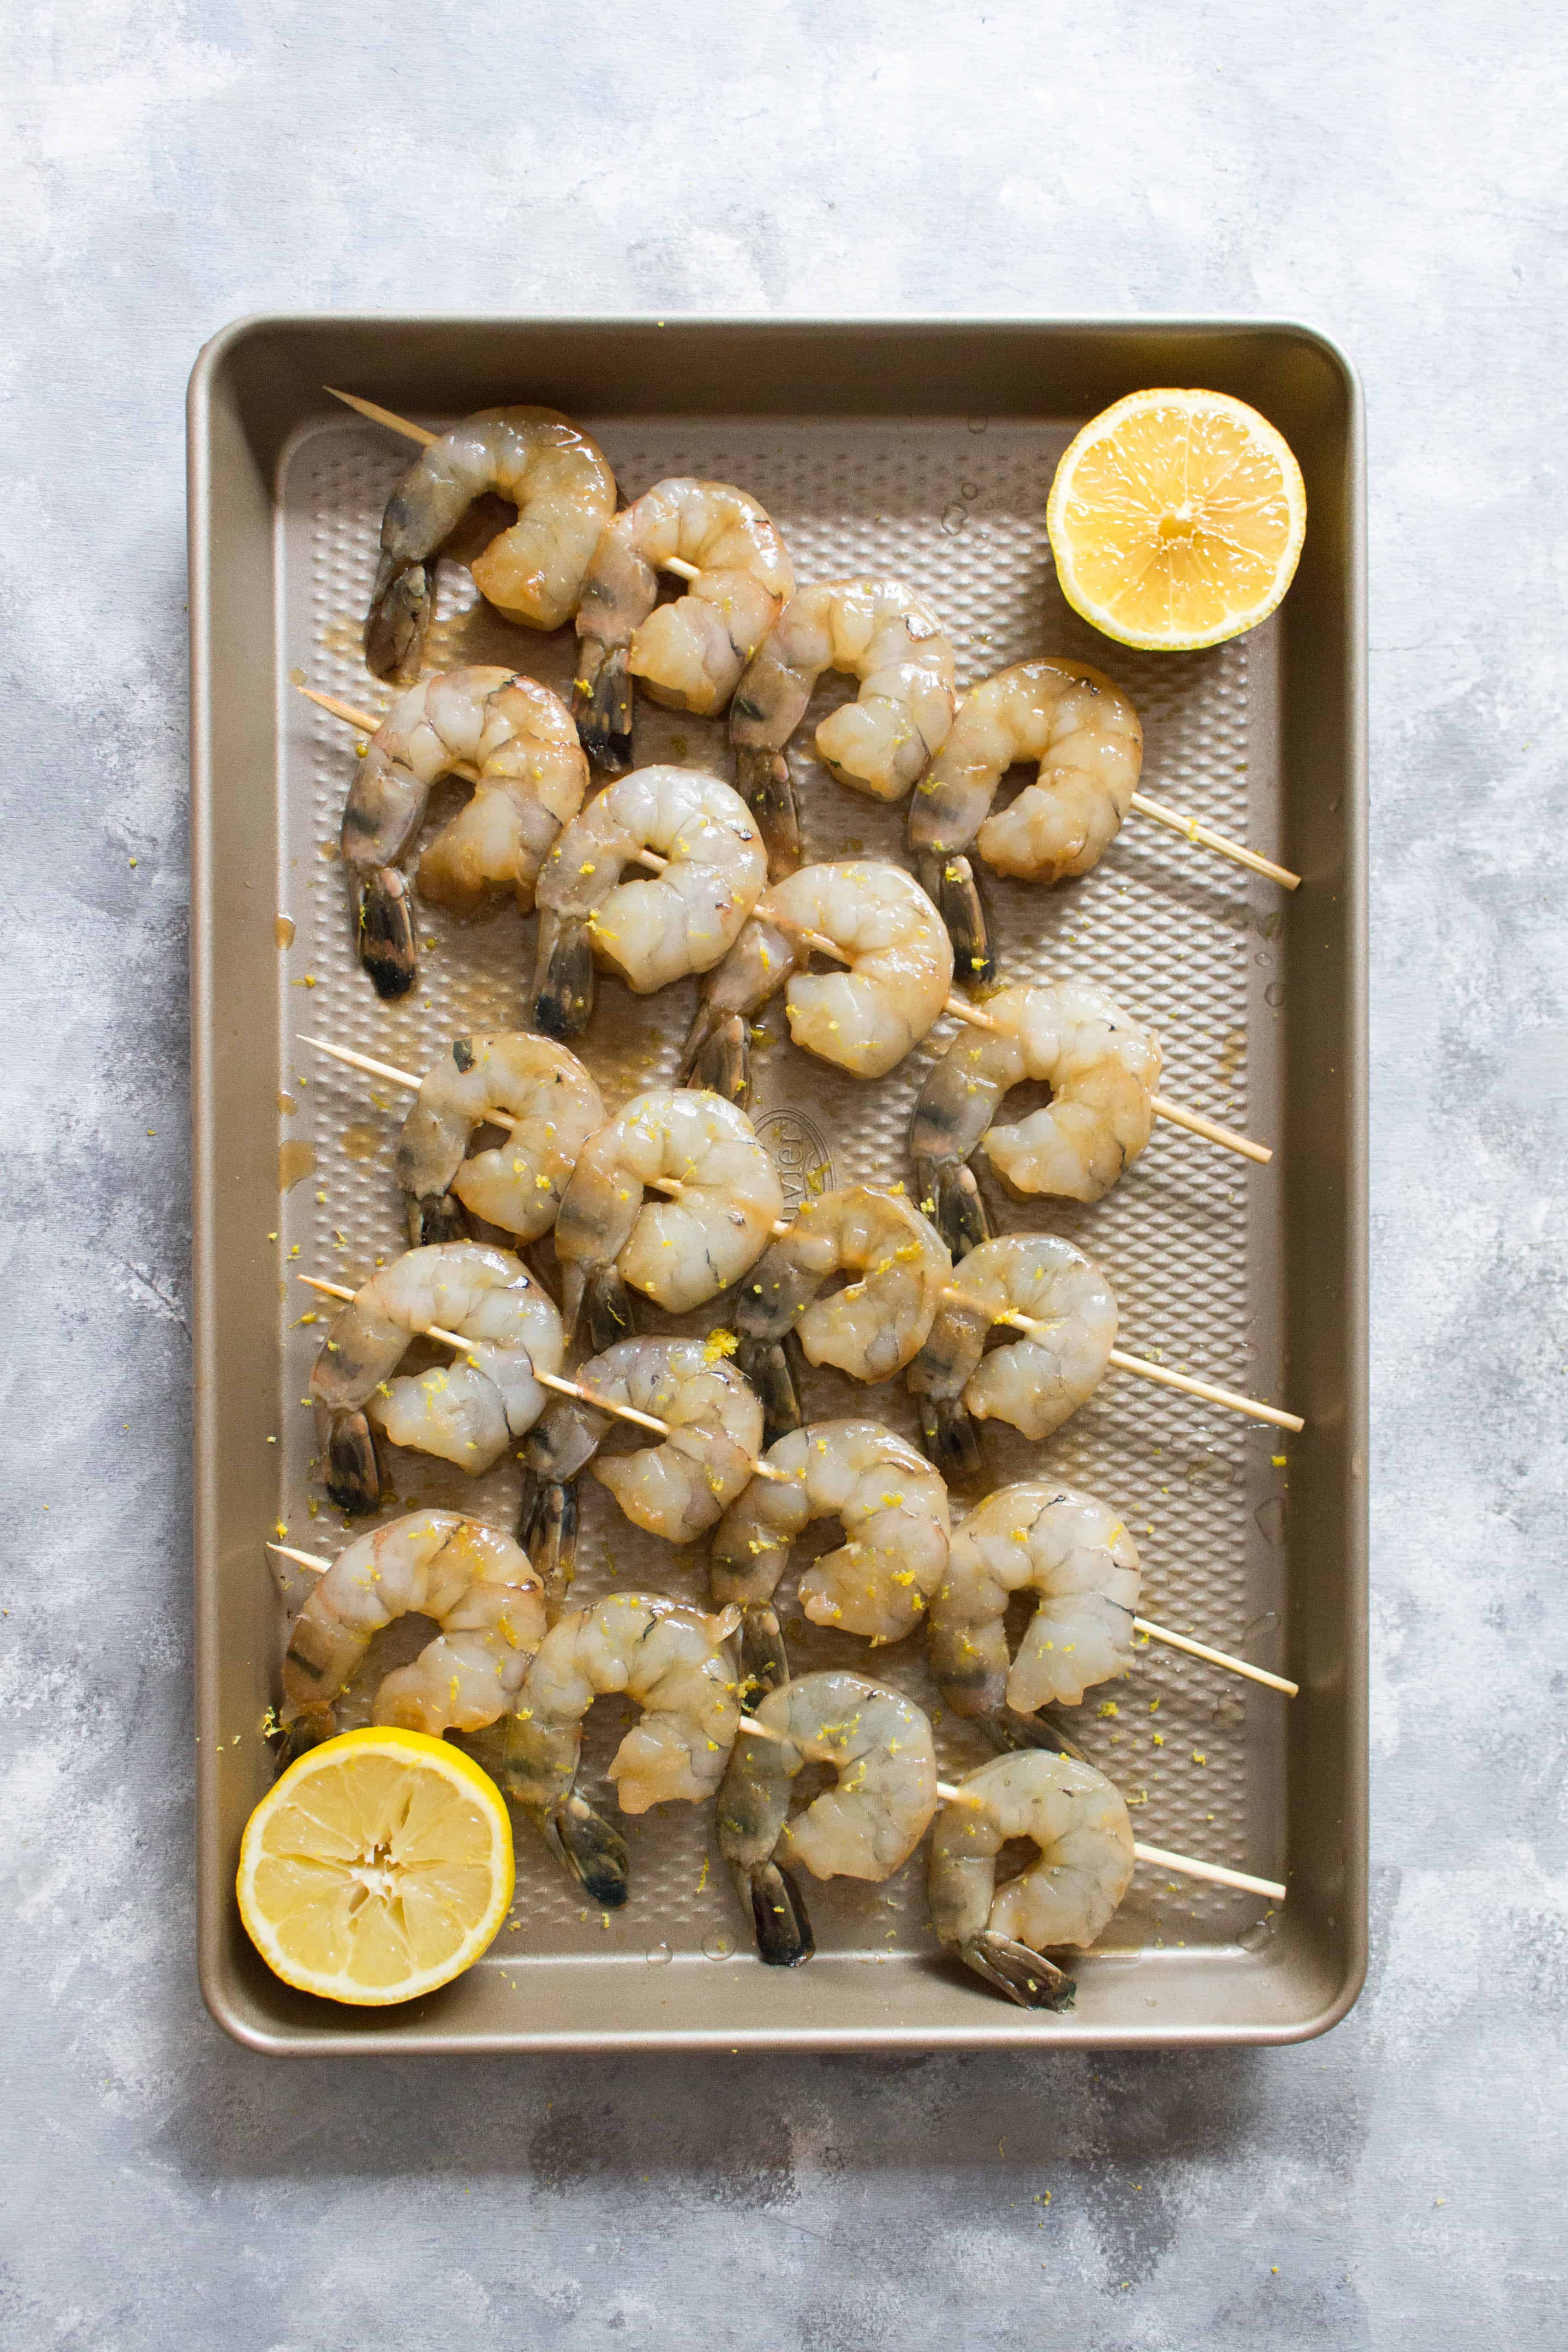 Cooked in under 10 minutes, this easy sweet hoisin lemon shrimp meal prep is packed with flavour. Marinate the shrimp overnight or for 30 minutes, and you've got yourself a delicious meal prep! Look no further for this week's meal prep than this sweet hoisin lemon shrimp recipe!